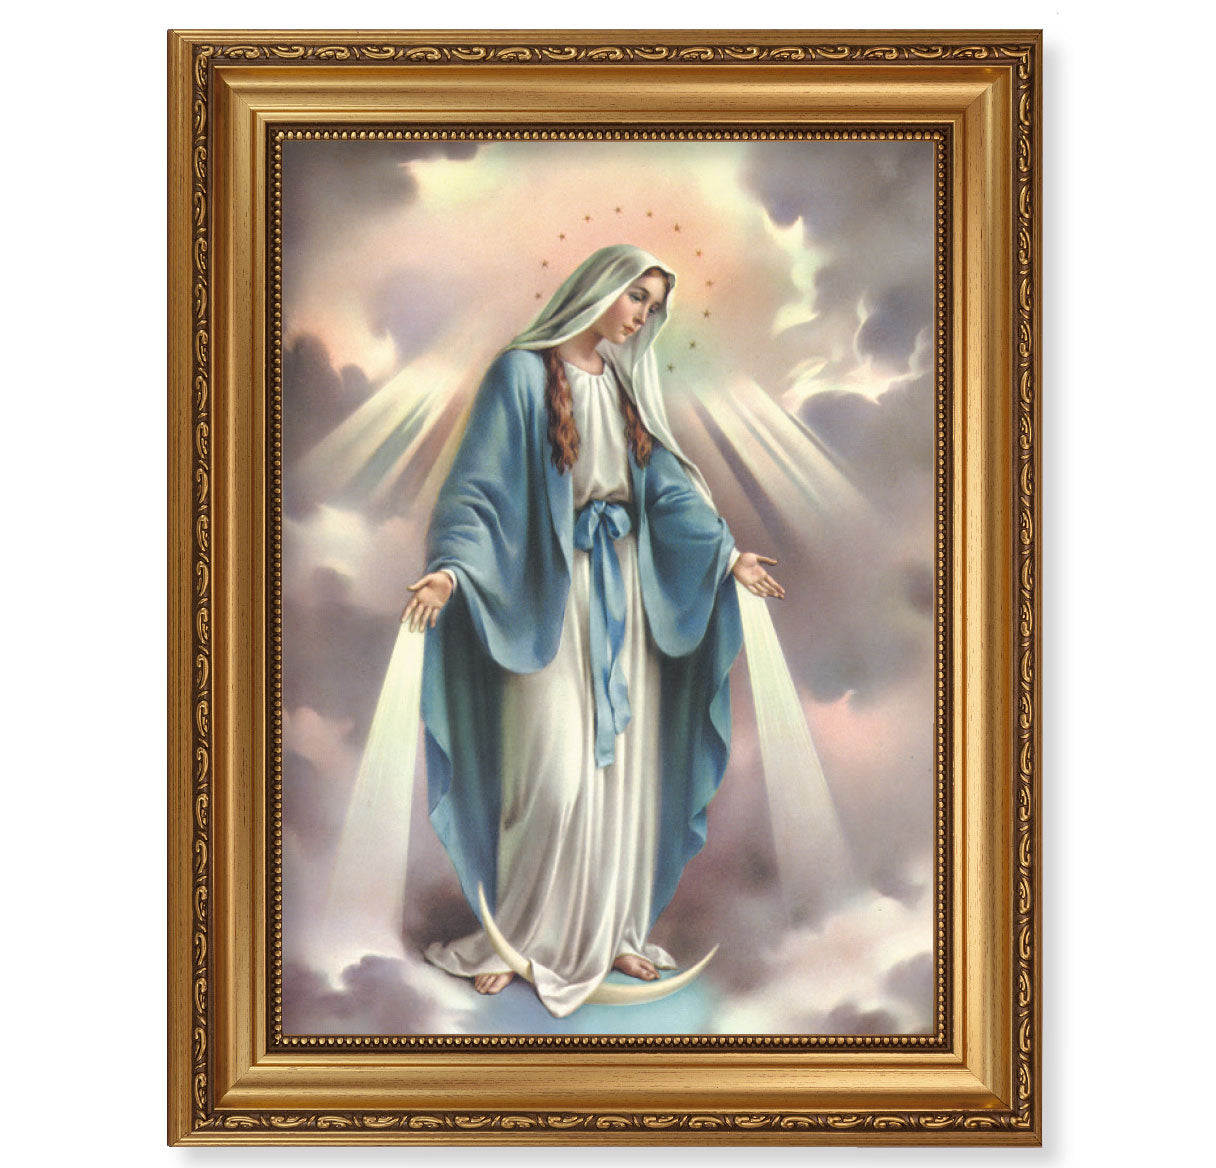 Our Lady of Grace Antique Picture Framed Wall Art Decor, Extra Large, Antique Gold-Leaf Frame with Acanthus-Leaf Trim and Beaded Lip